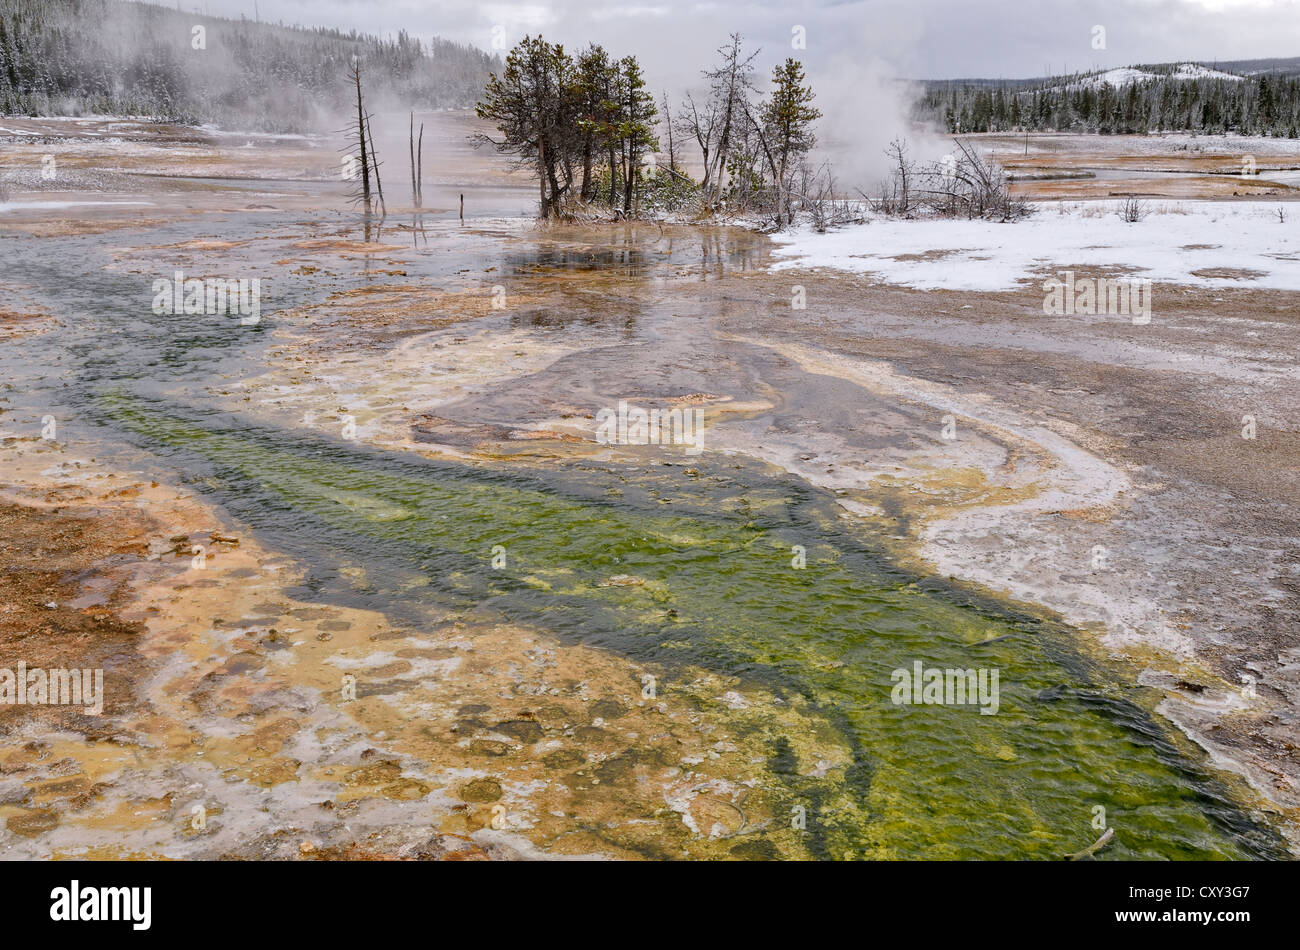 Biscuit Basin, Parc National de Yellowstone, Wyoming, USA Banque D'Images